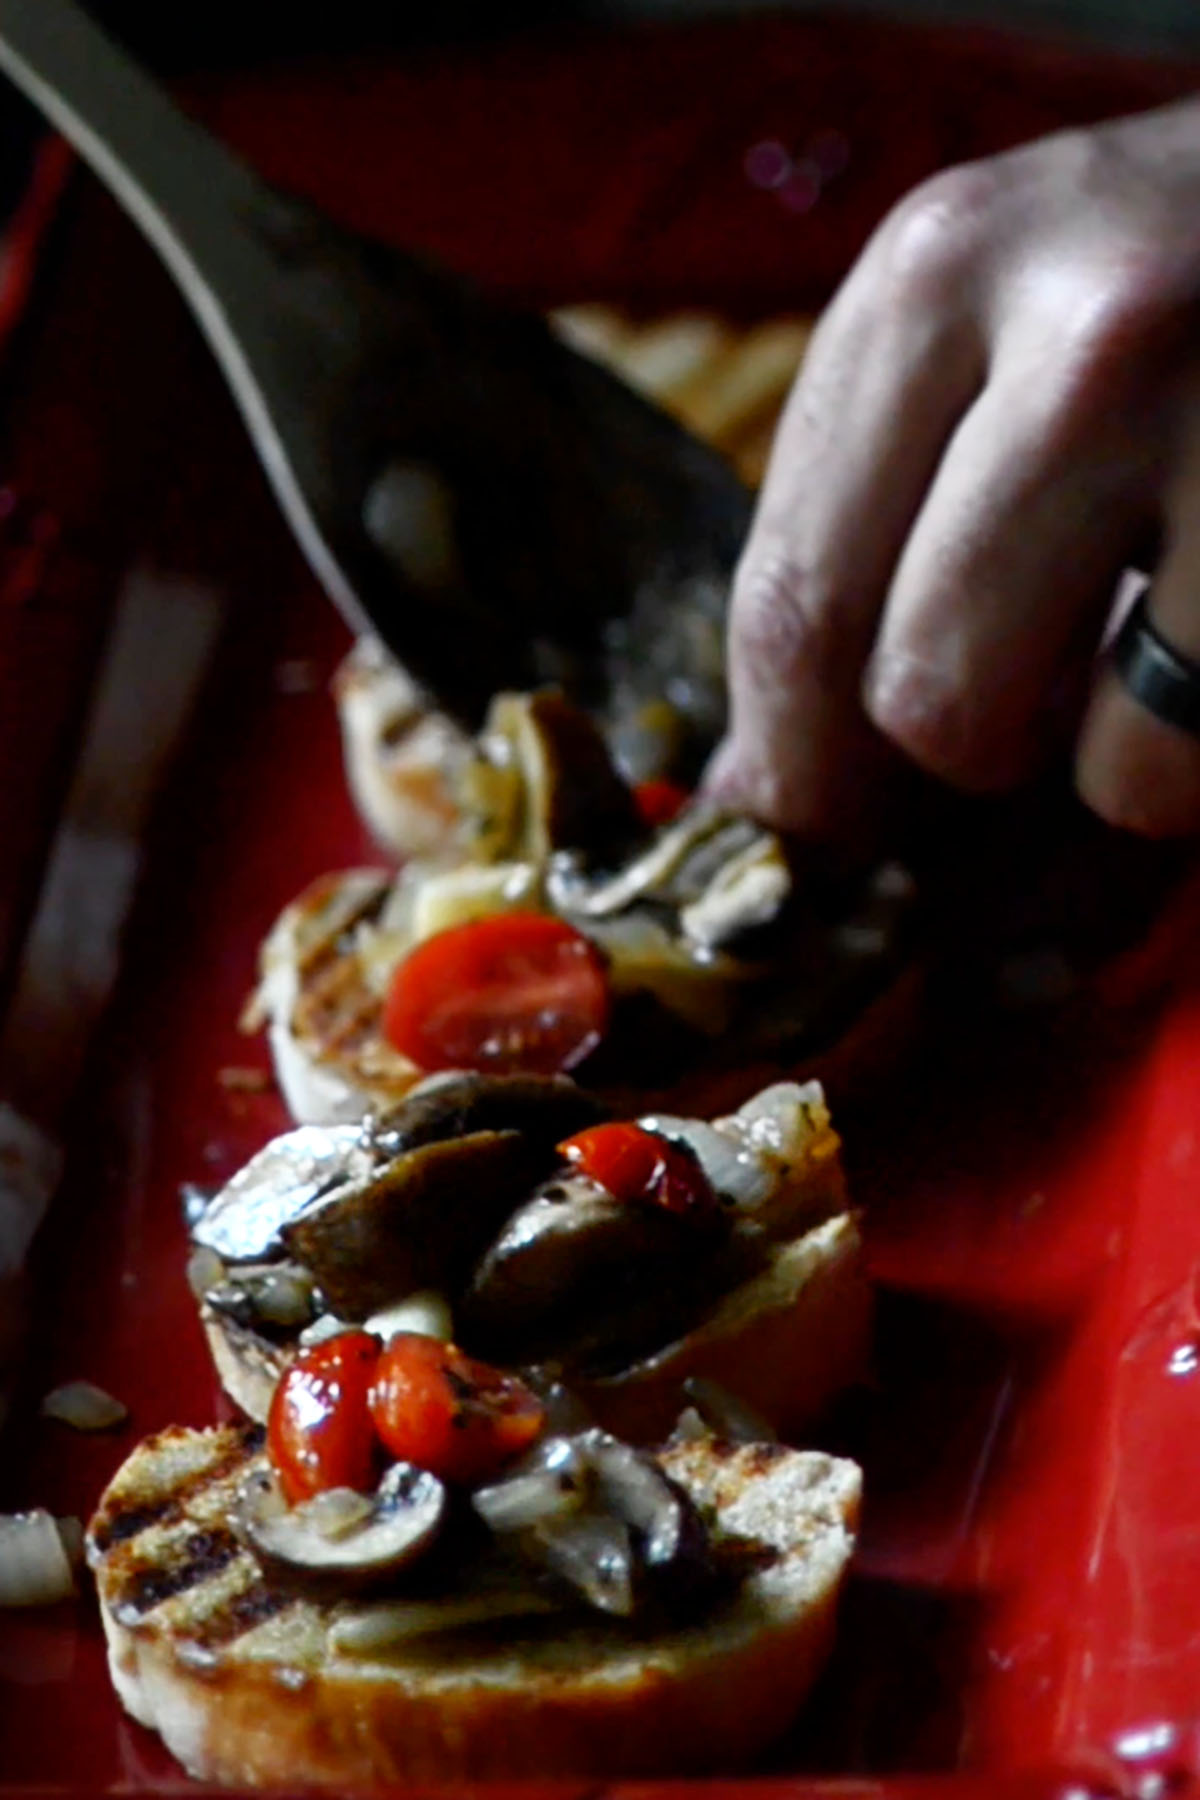 Sliced and toasted baguette being topped with roasted tomatoes, mushrooms, and onions.